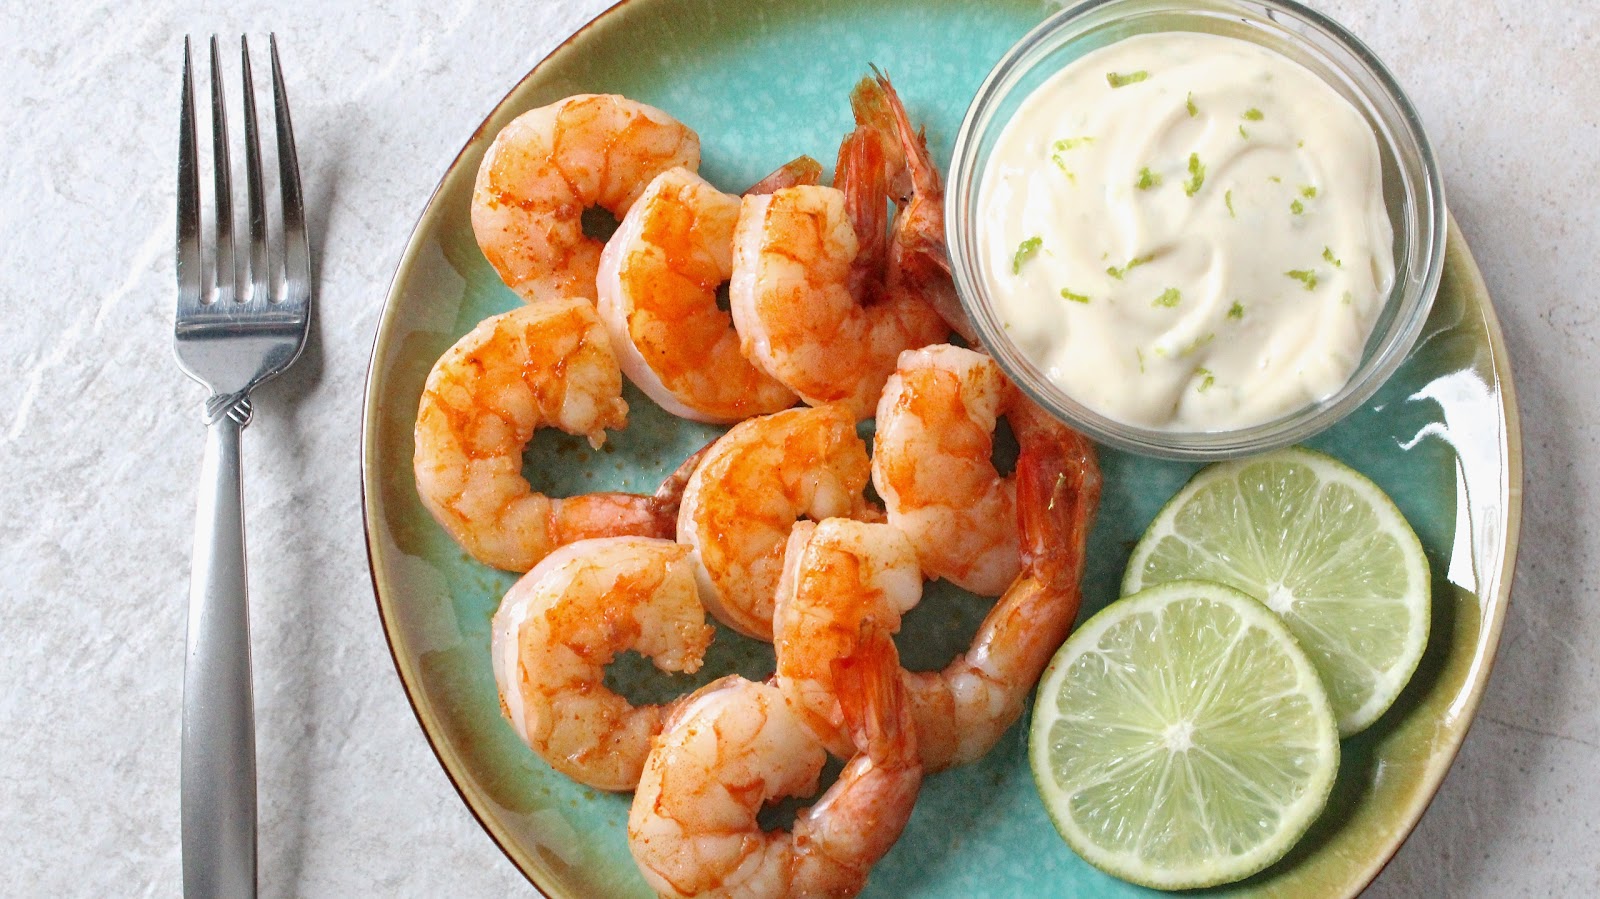 Chipotle Chili Pepper Shrimp with a Limy...